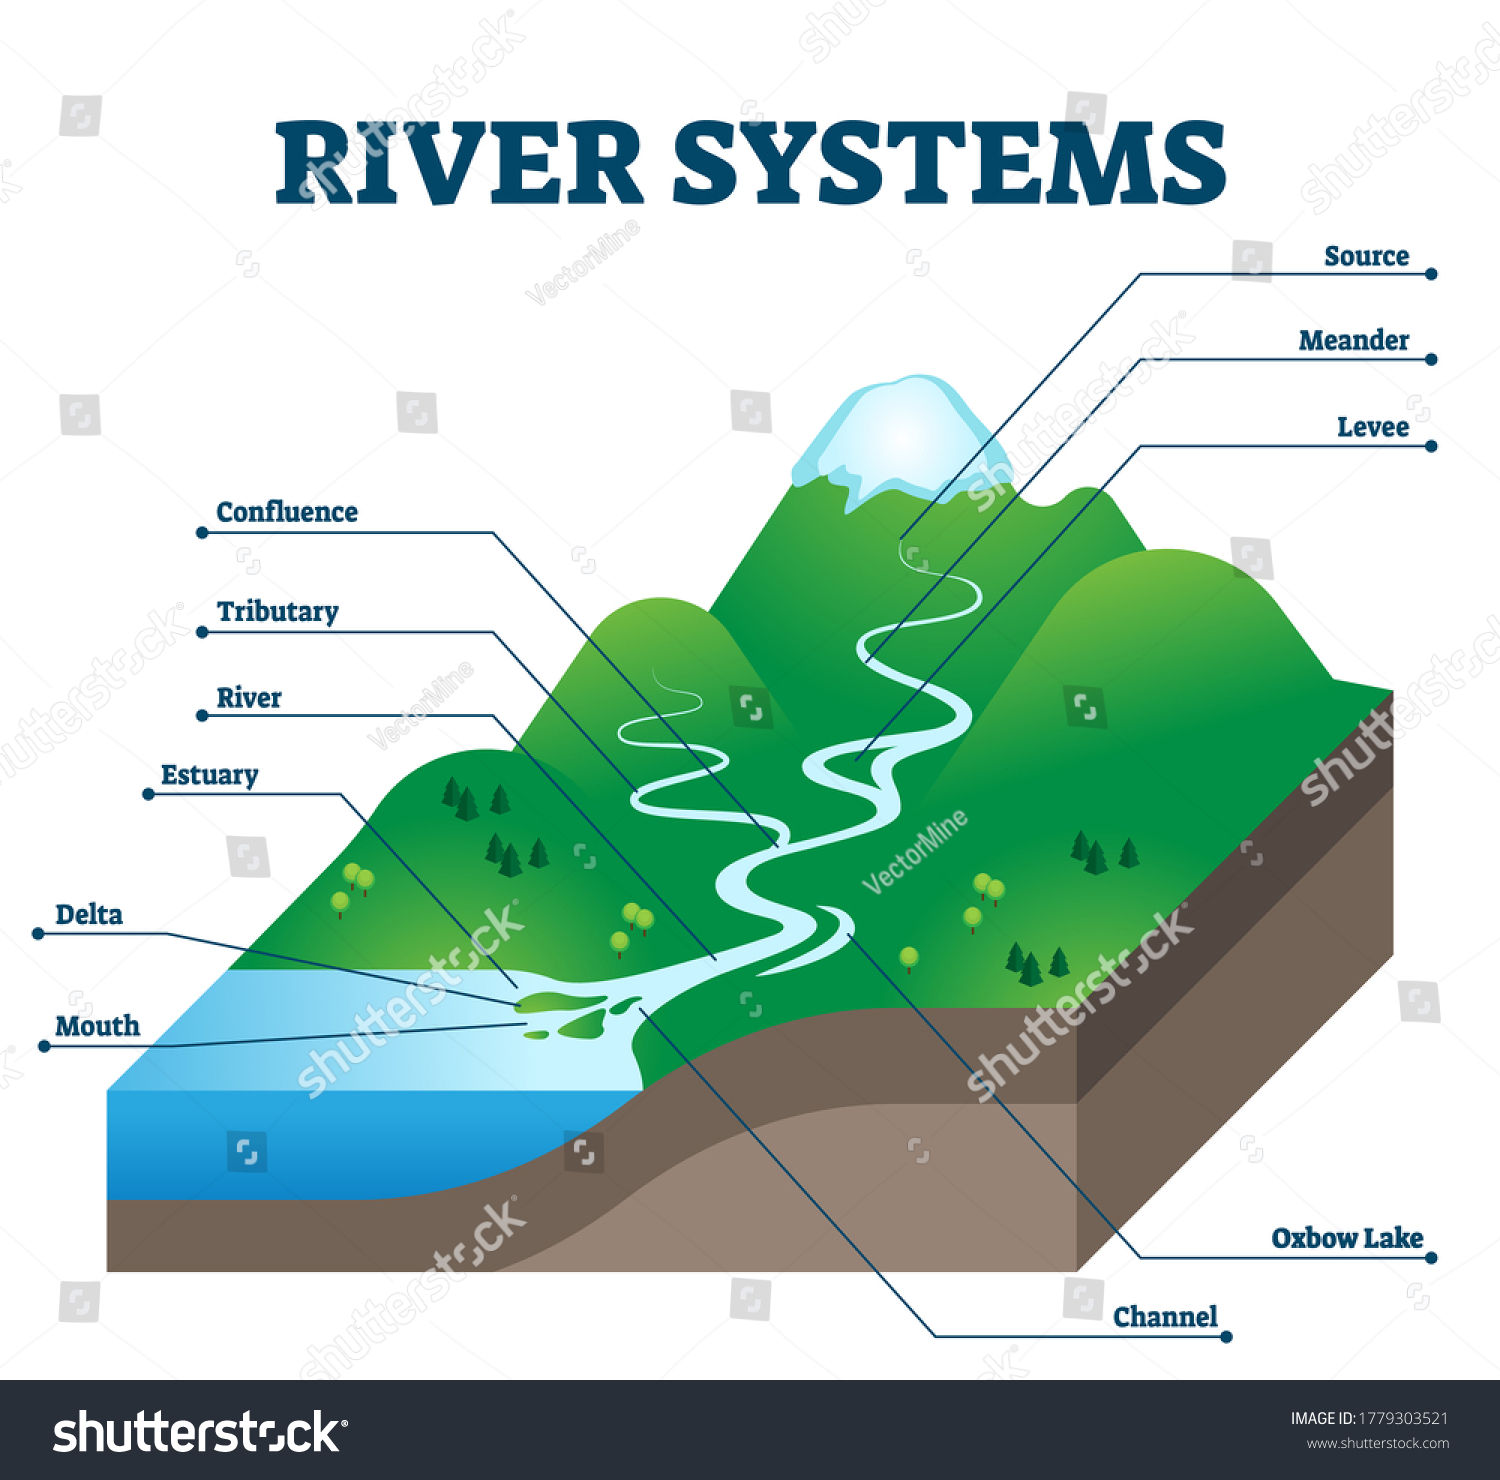 Tributary stream Images, Stock Photos & Vectors Shutterstock